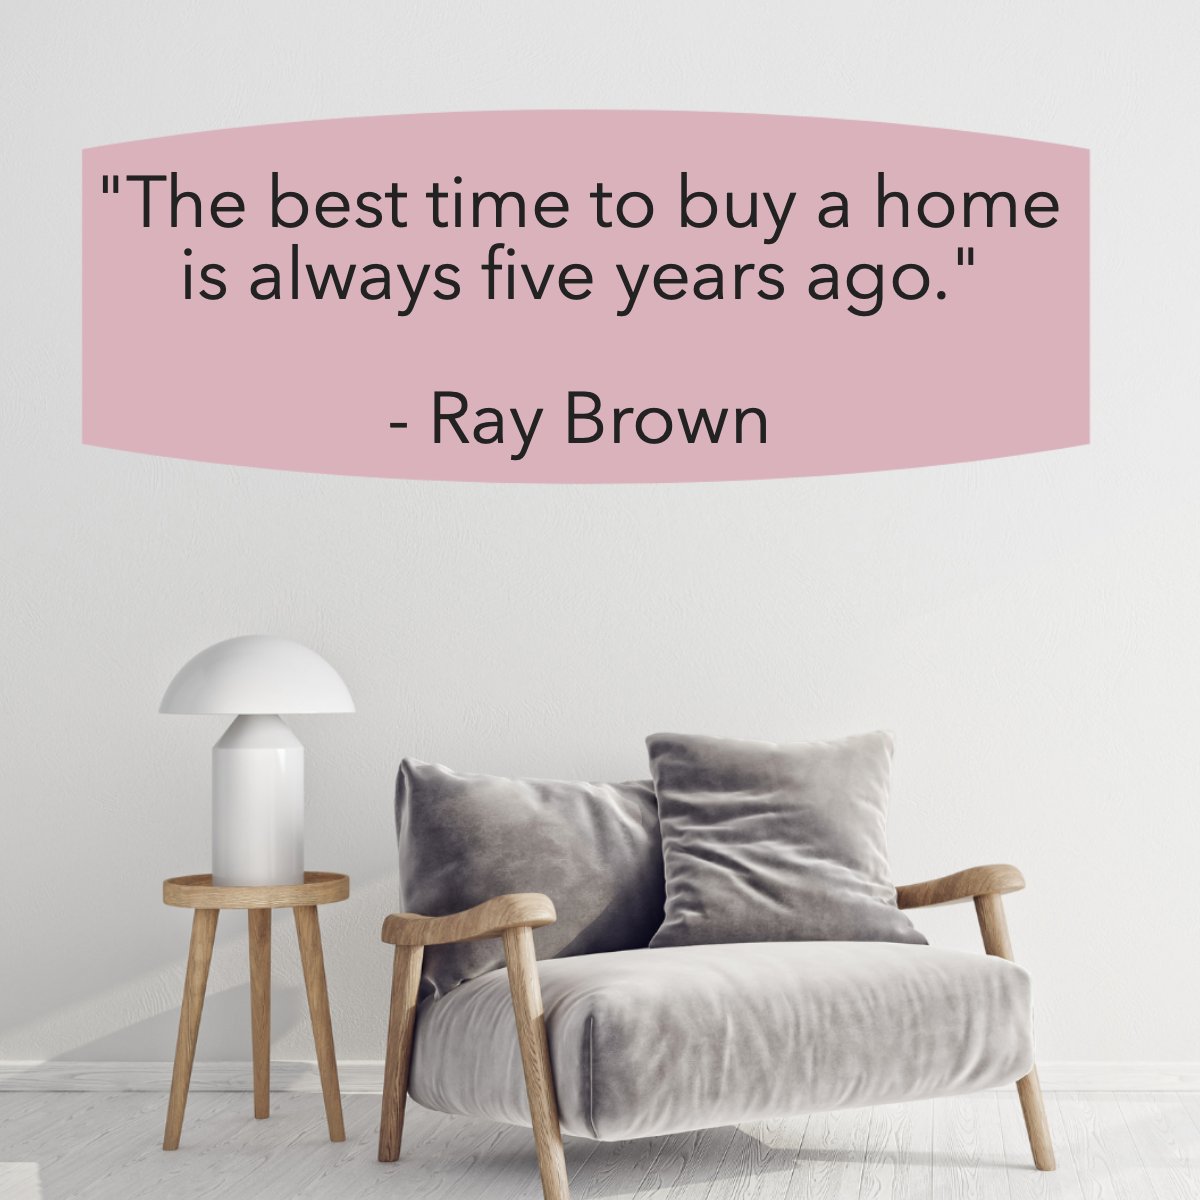 'The best time to buy a home is always five years ago'
― Ray Brown 📖

#home #homesale #hometime #besttimetobuy #quoteoftheday #quotes #raybrown
 #homeswithtiffany #homegoals #homeinspiration #design #homes #realestate #chic #didyouknow #selling #buying